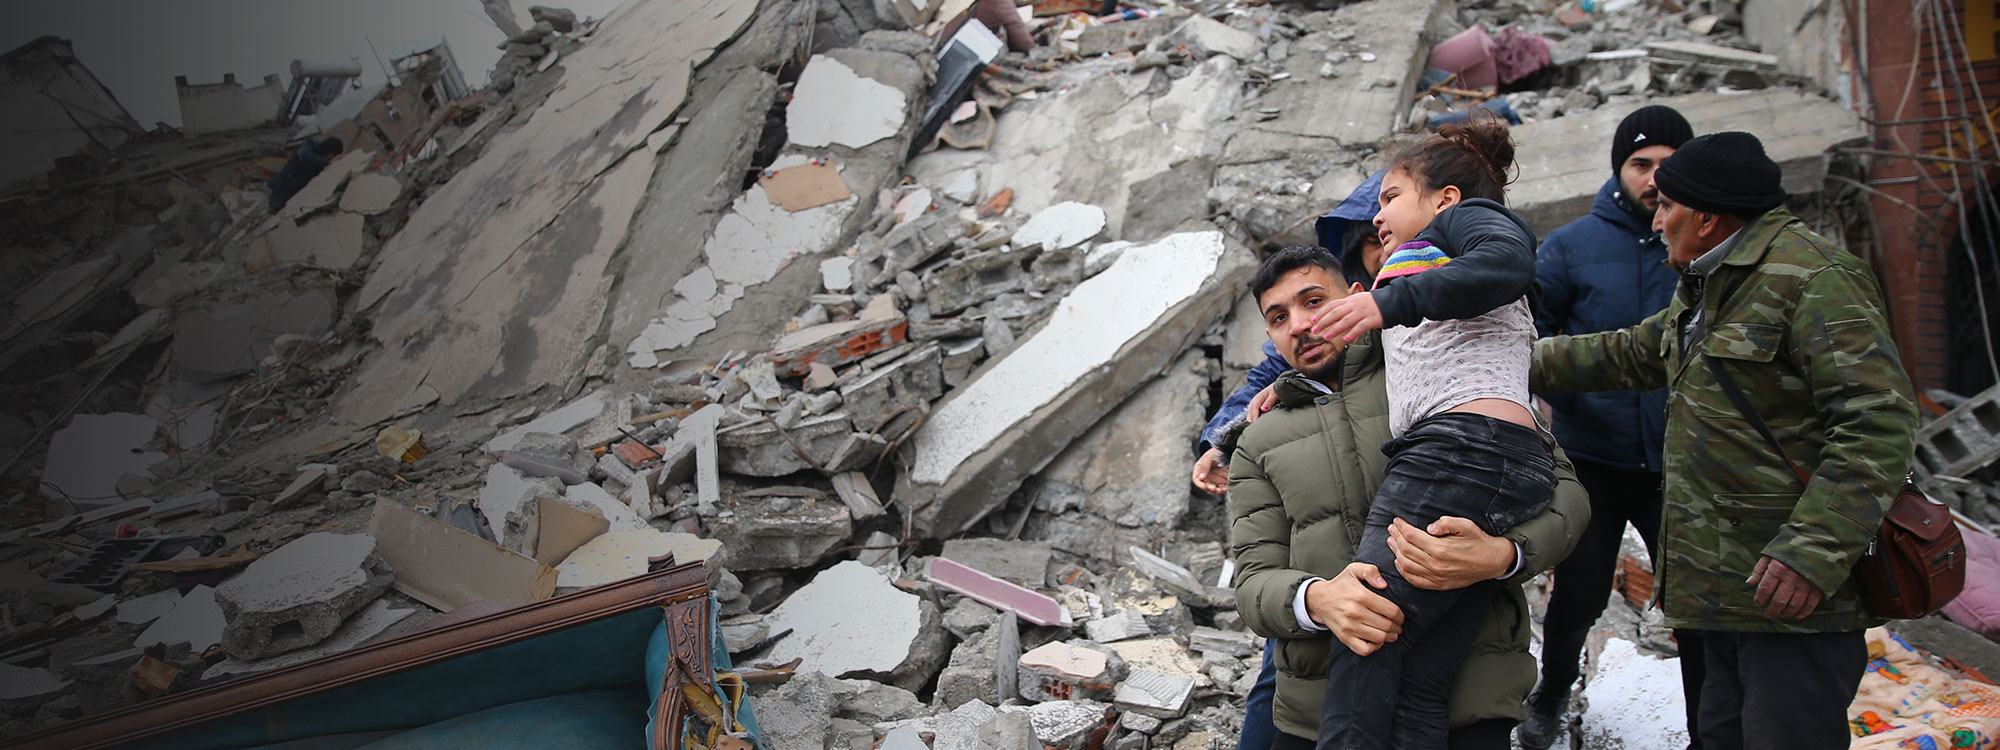 A child is rescued under rubble after earthquake hits Turkey